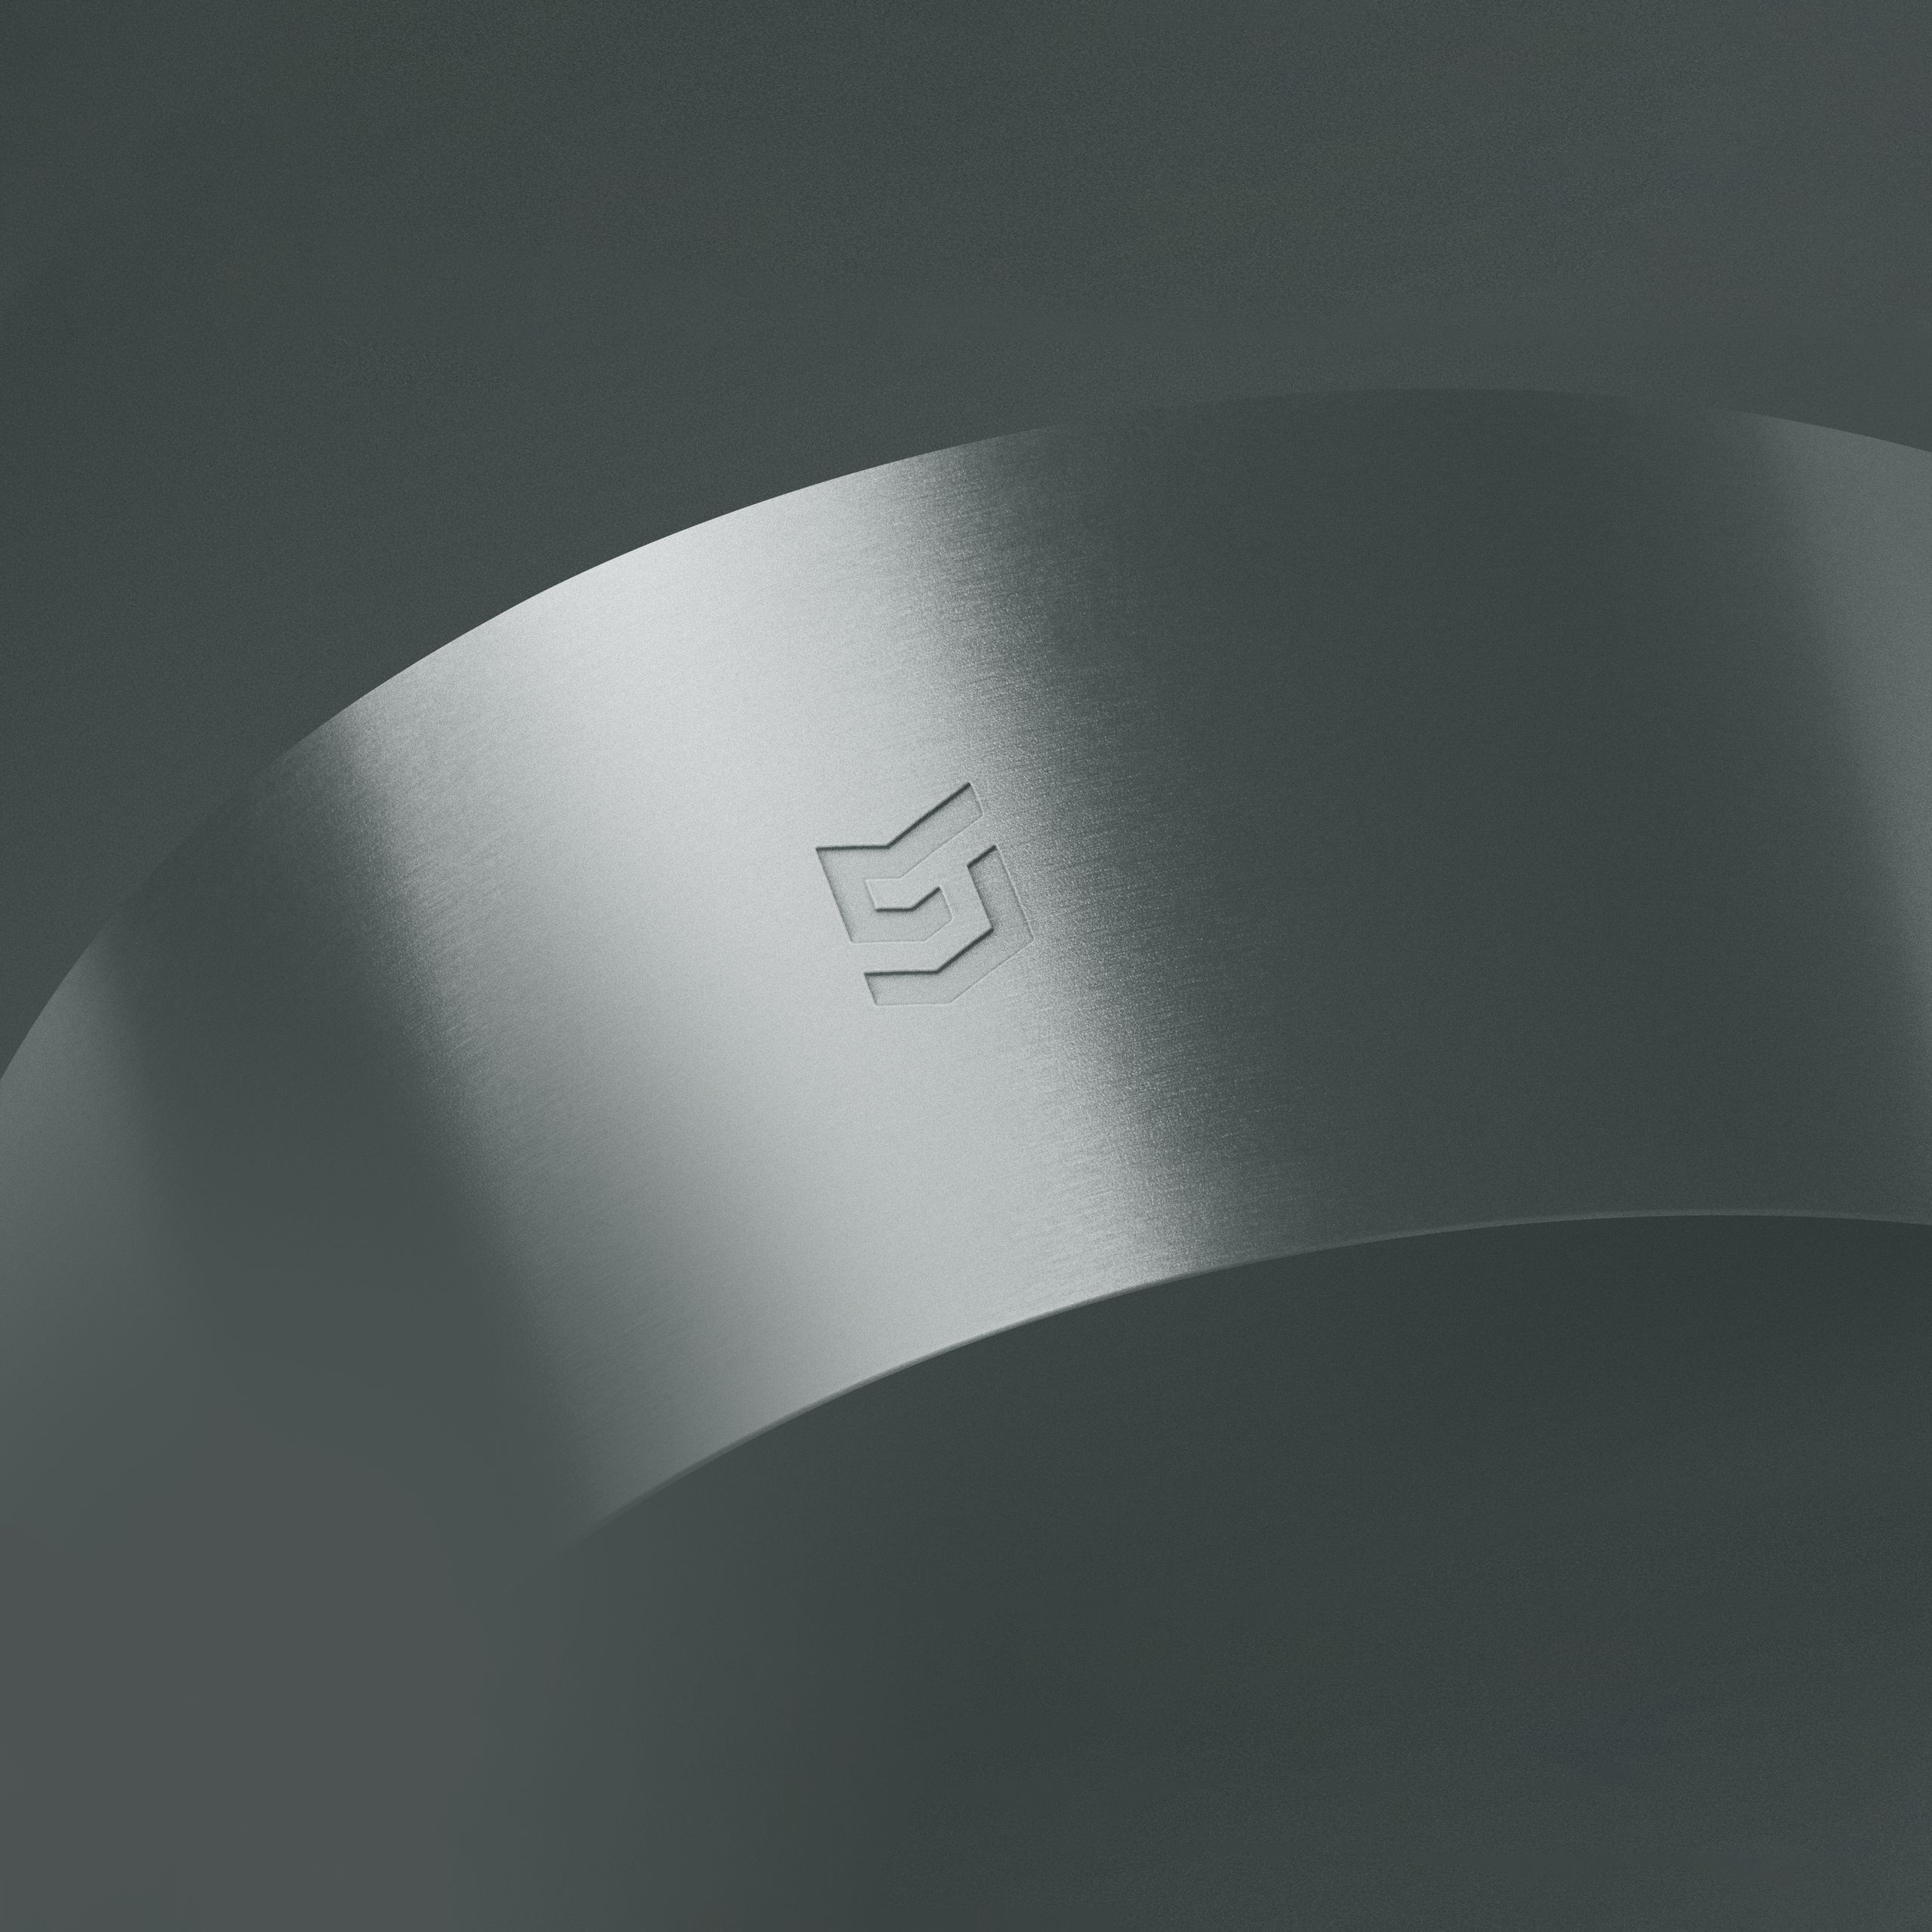 CFS Fixings logo mark embossed onto a brushed steel surface